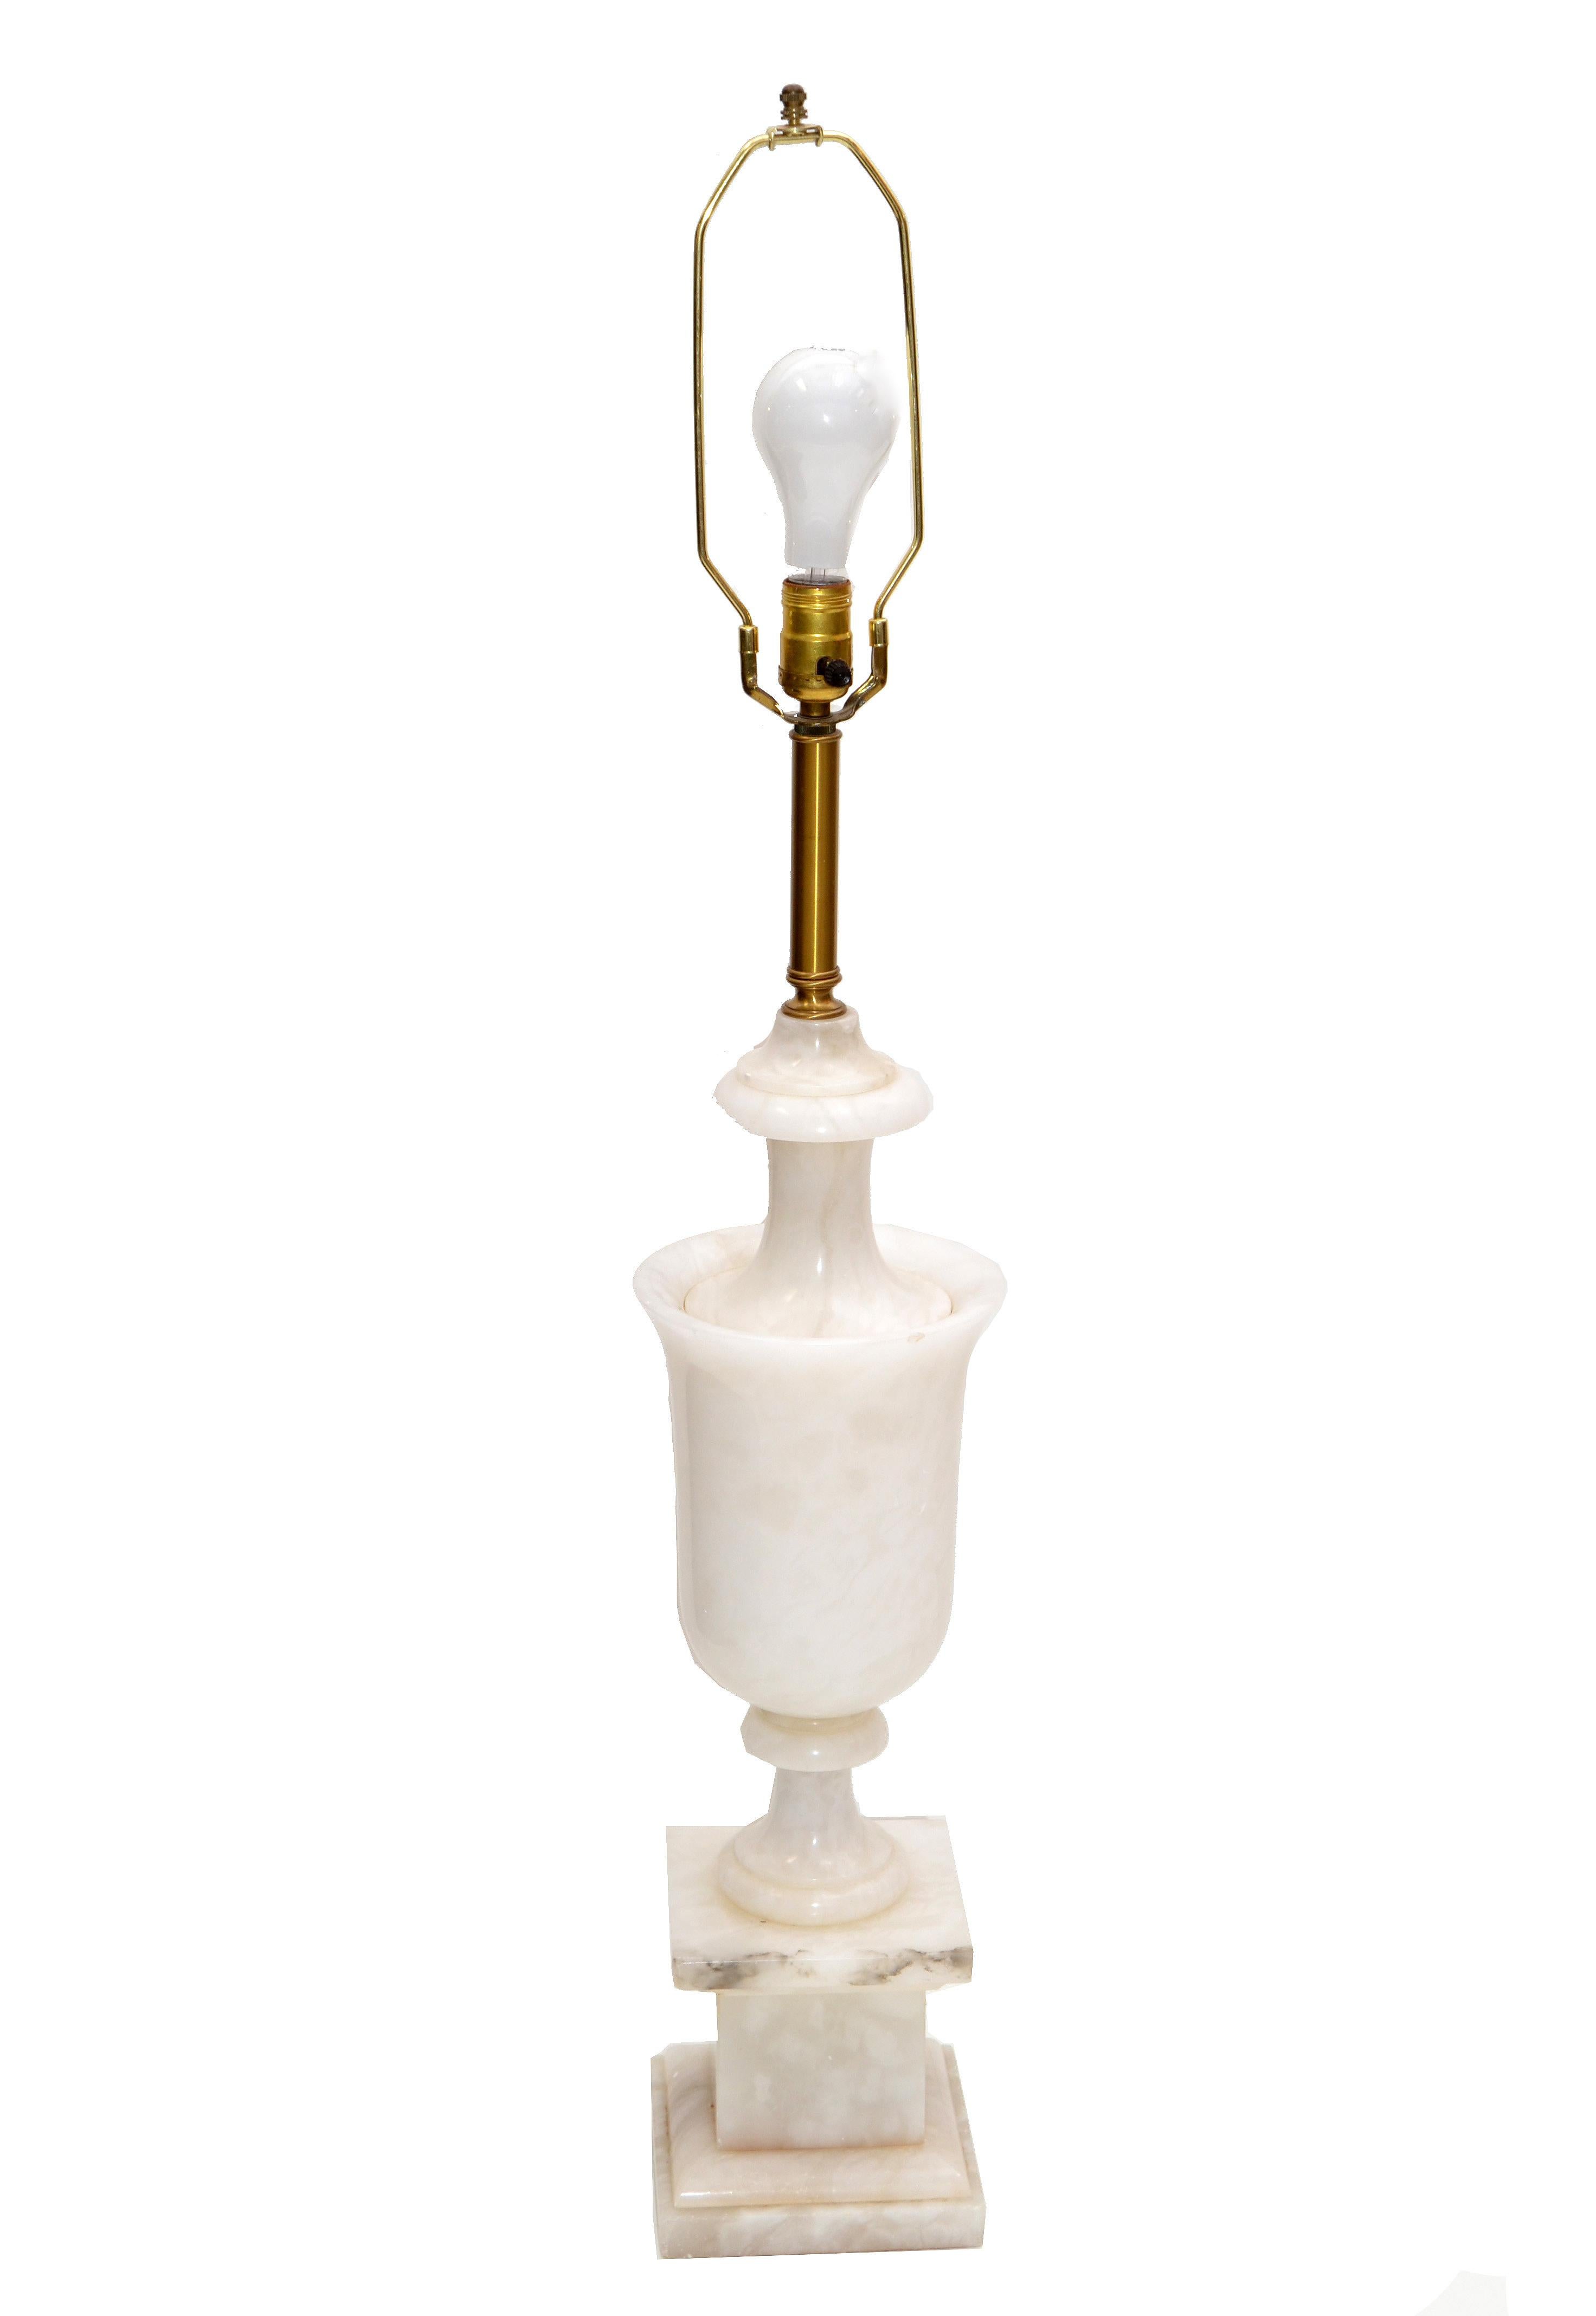 Art Deco Carrara marble hand carved and brass table lamp, made in Italy.
Comes with harp and finial and takes 1-light bulb max. 75 watts.
No shade.